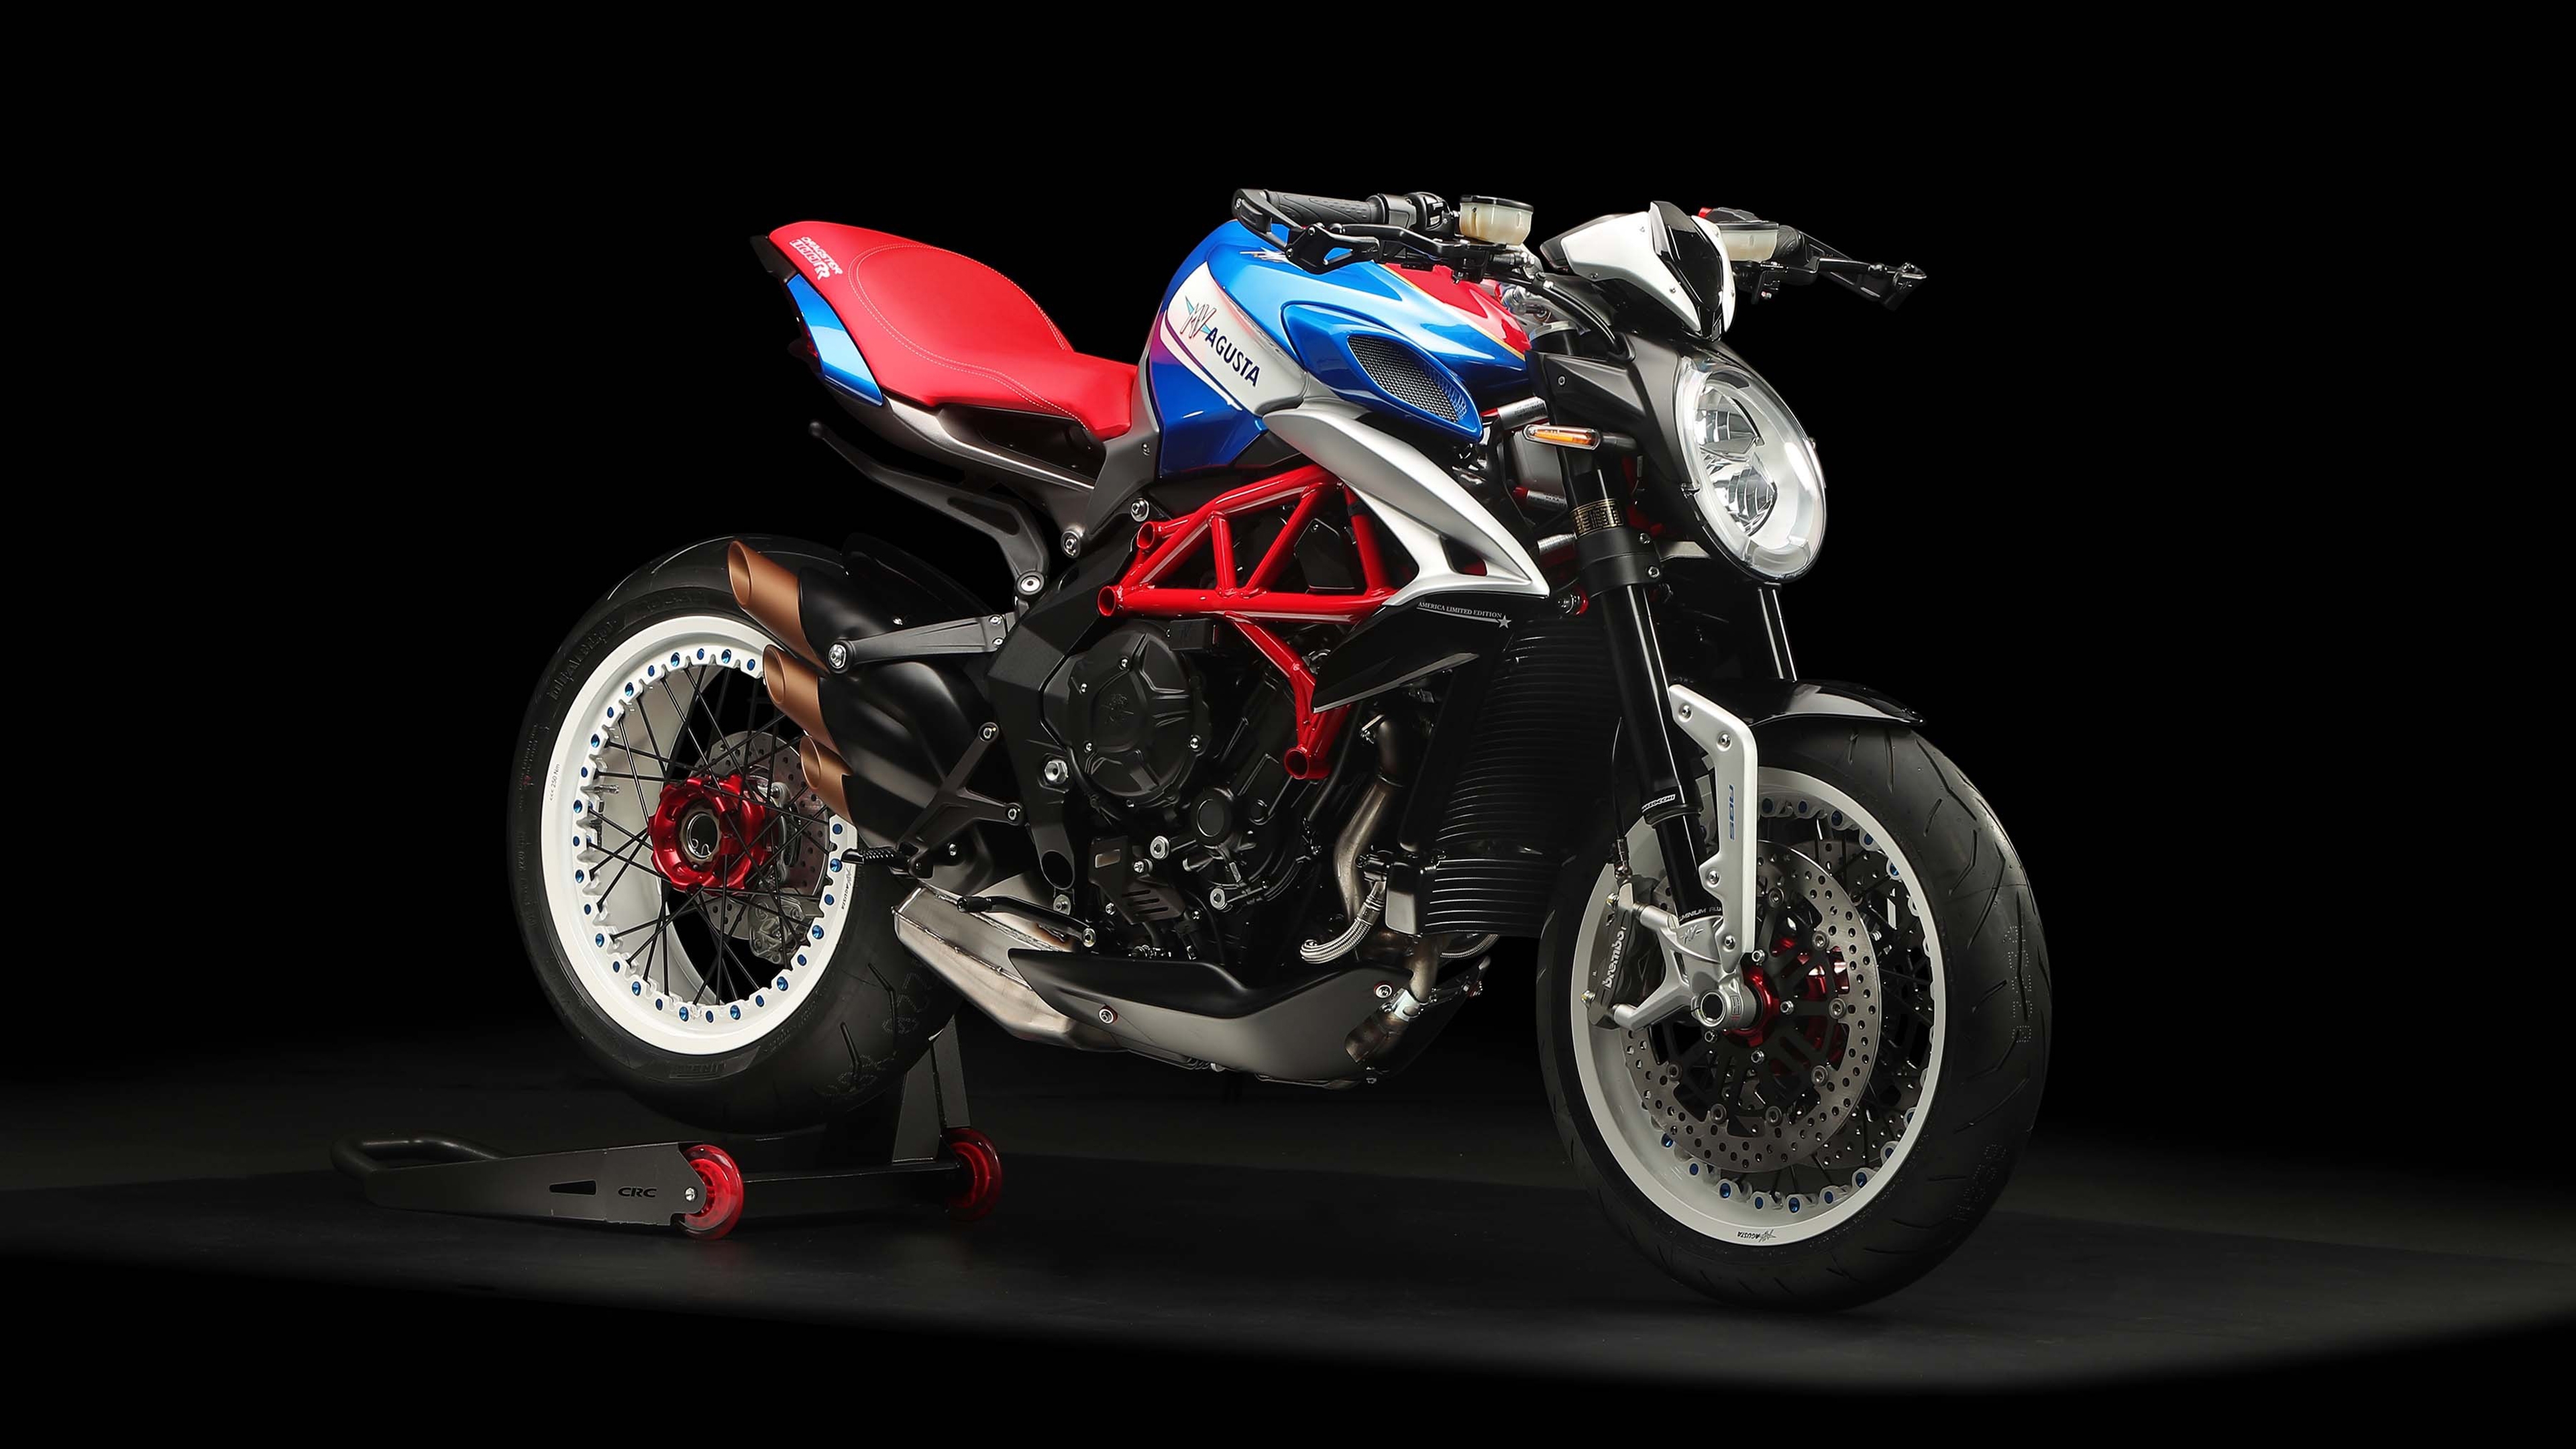 Motorcycle mv agusta dragster 800 rr america on black background